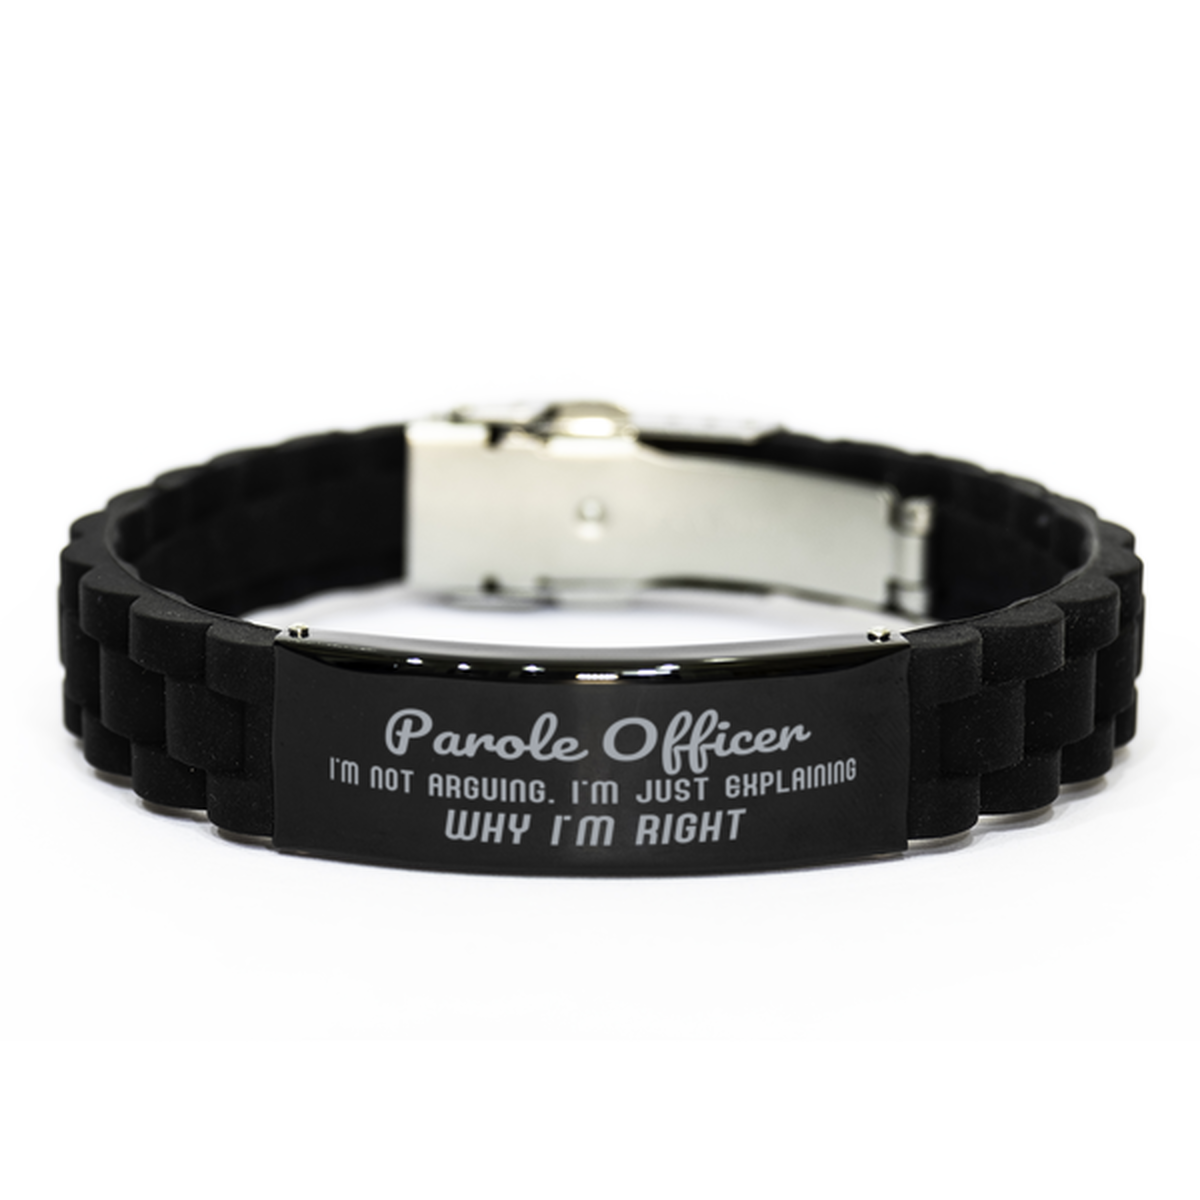 Parole Officer I'm not Arguing. I'm Just Explaining Why I'm RIGHT Black Glidelock Clasp Bracelet, Funny Saying Quote Parole Officer Gifts For Parole Officer Graduation Birthday Christmas Gifts for Men Women Coworker